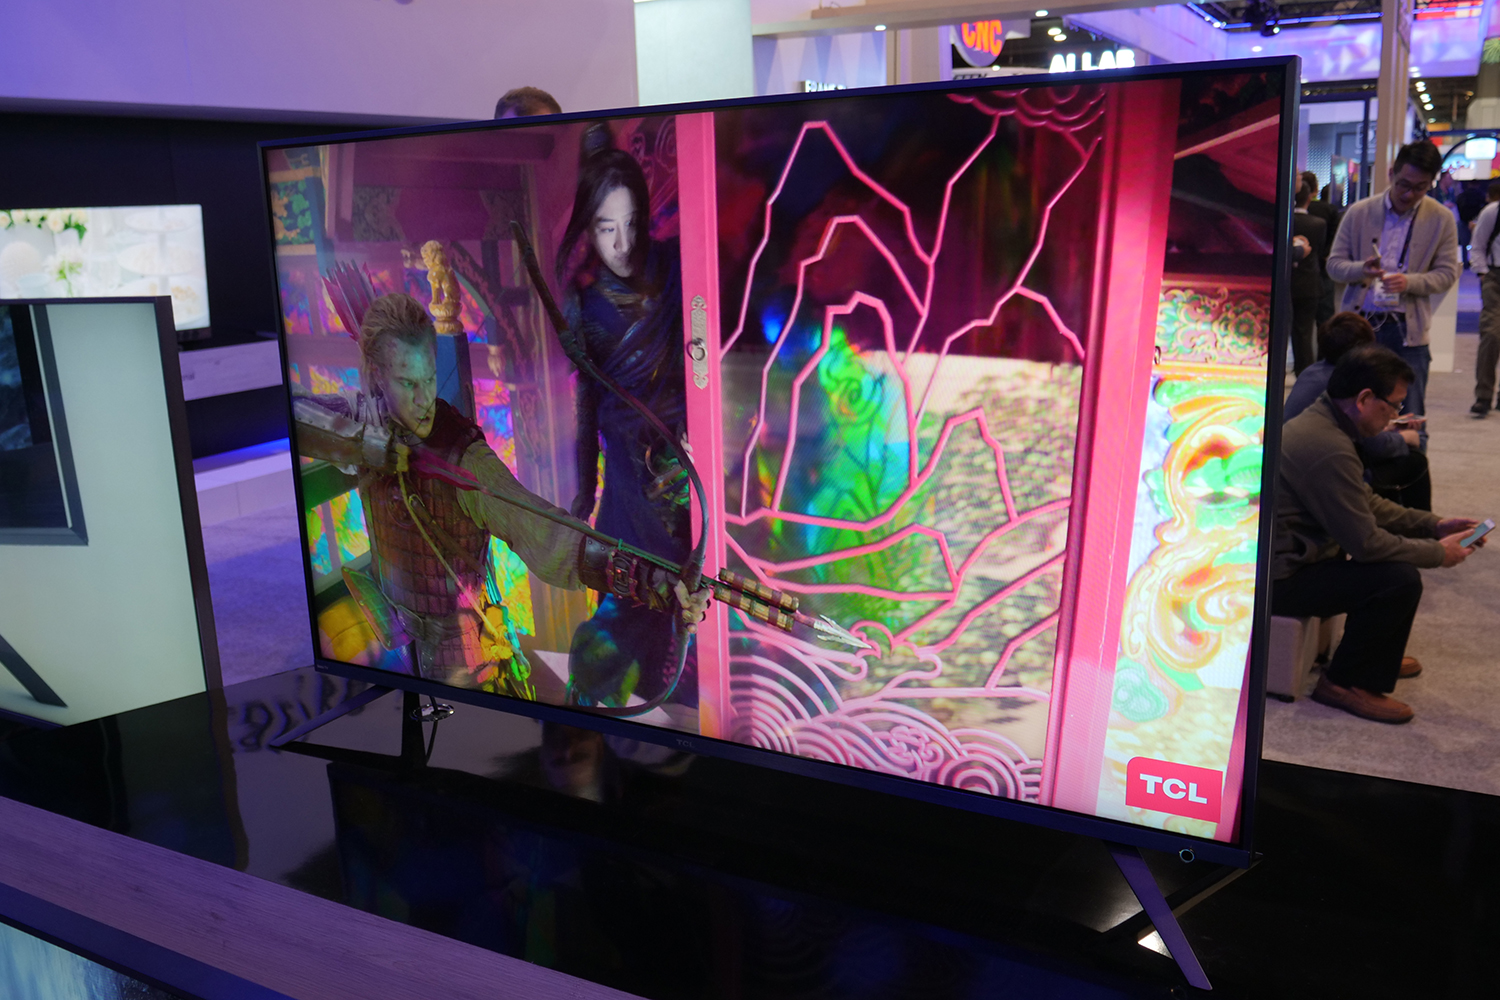 tcl 6 series 4k hdr led tv first look sleeper hit of 2018 ces2018 1